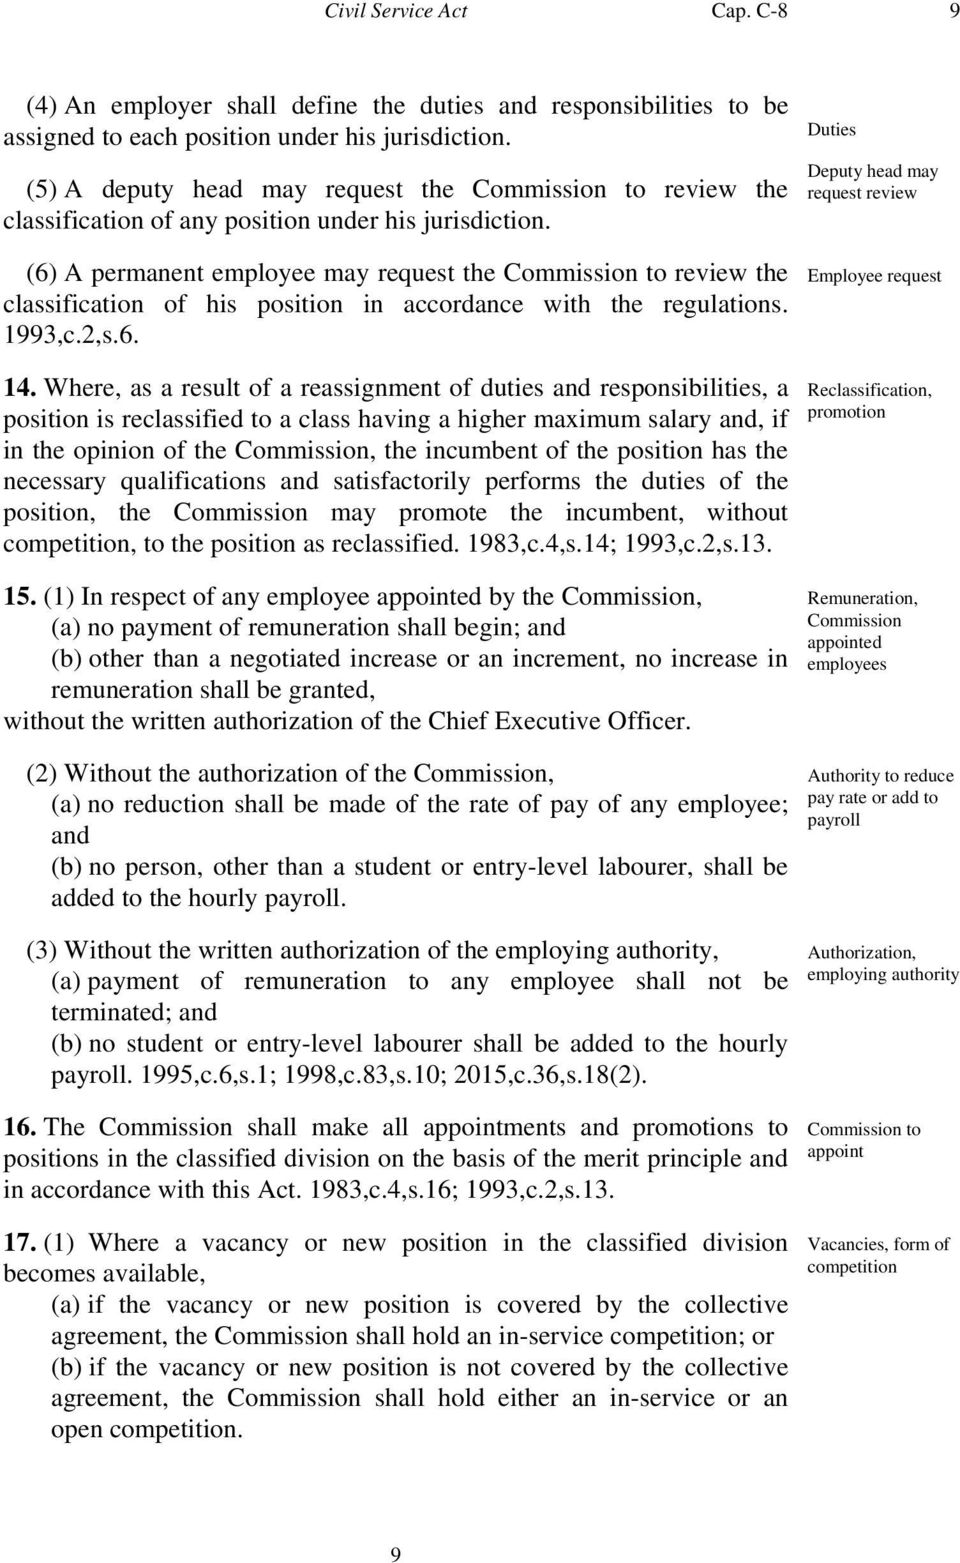 (6) A permanent employee may request the Commission to review the classification of his position in accordance with the regulations. 1993,c.2,s.6. Duties Deputy head may request review Employee request 14.